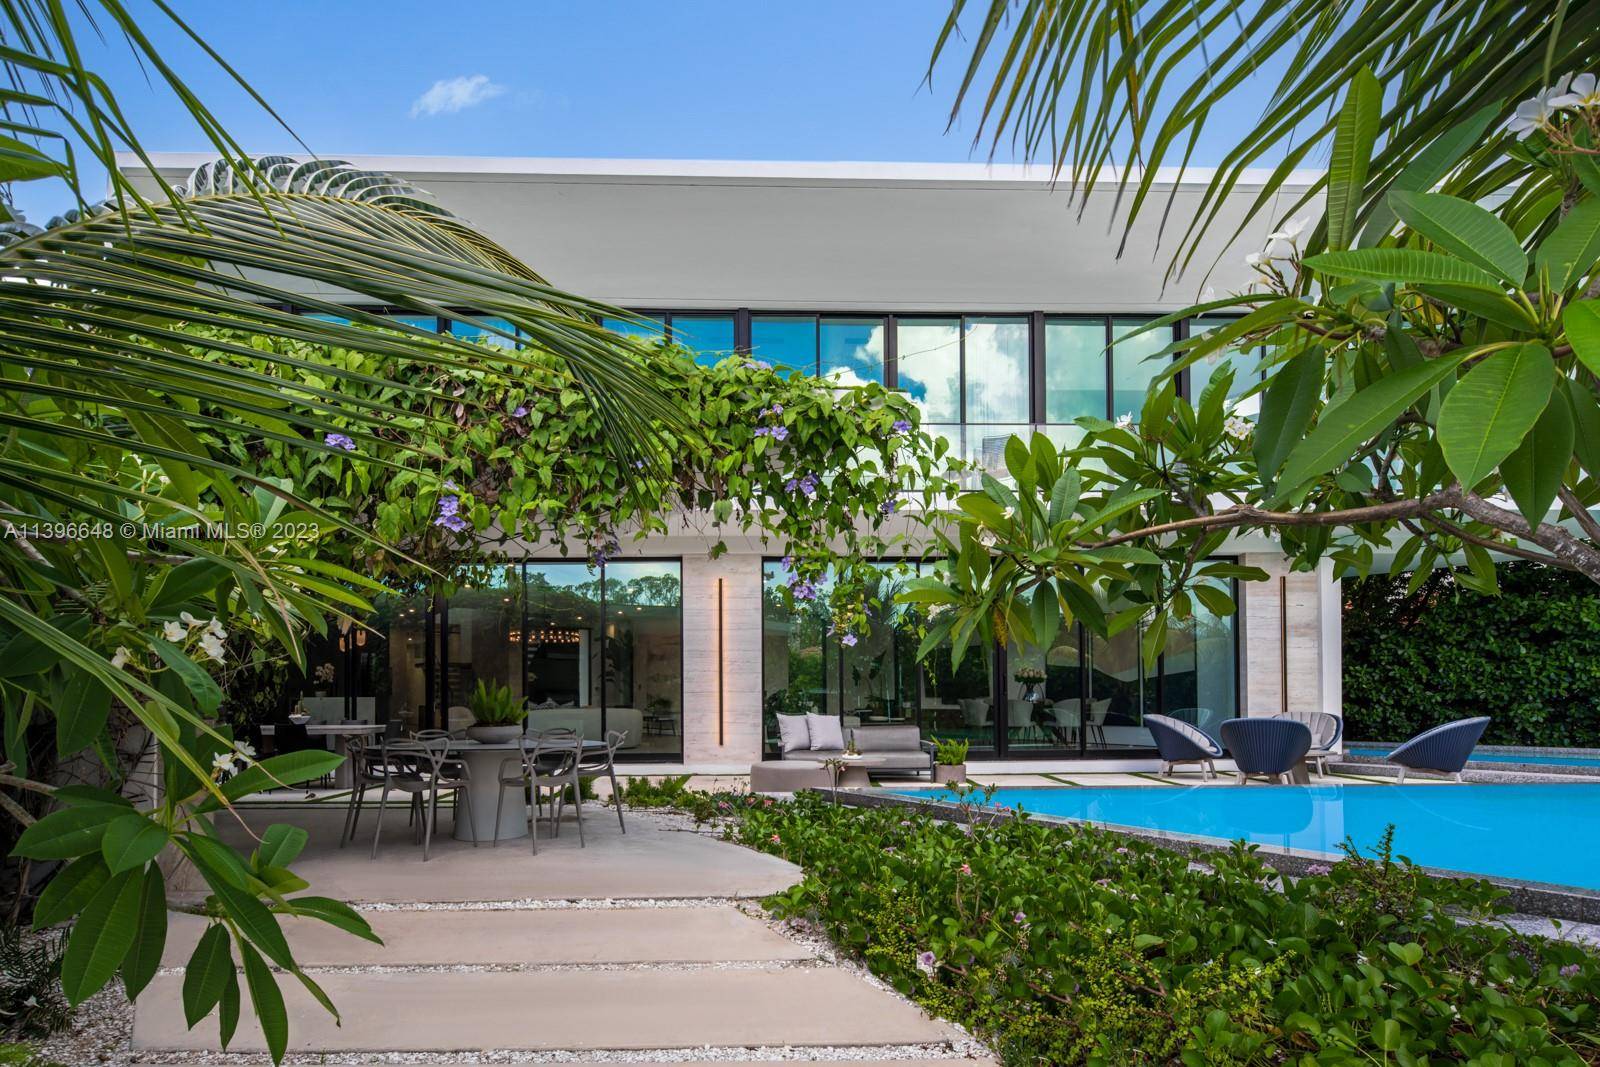 Step Inside With Me ! Draped in bougainvillea, this modern waterfront on coveted lower North Bay Road is open to SELLER FINANCING.